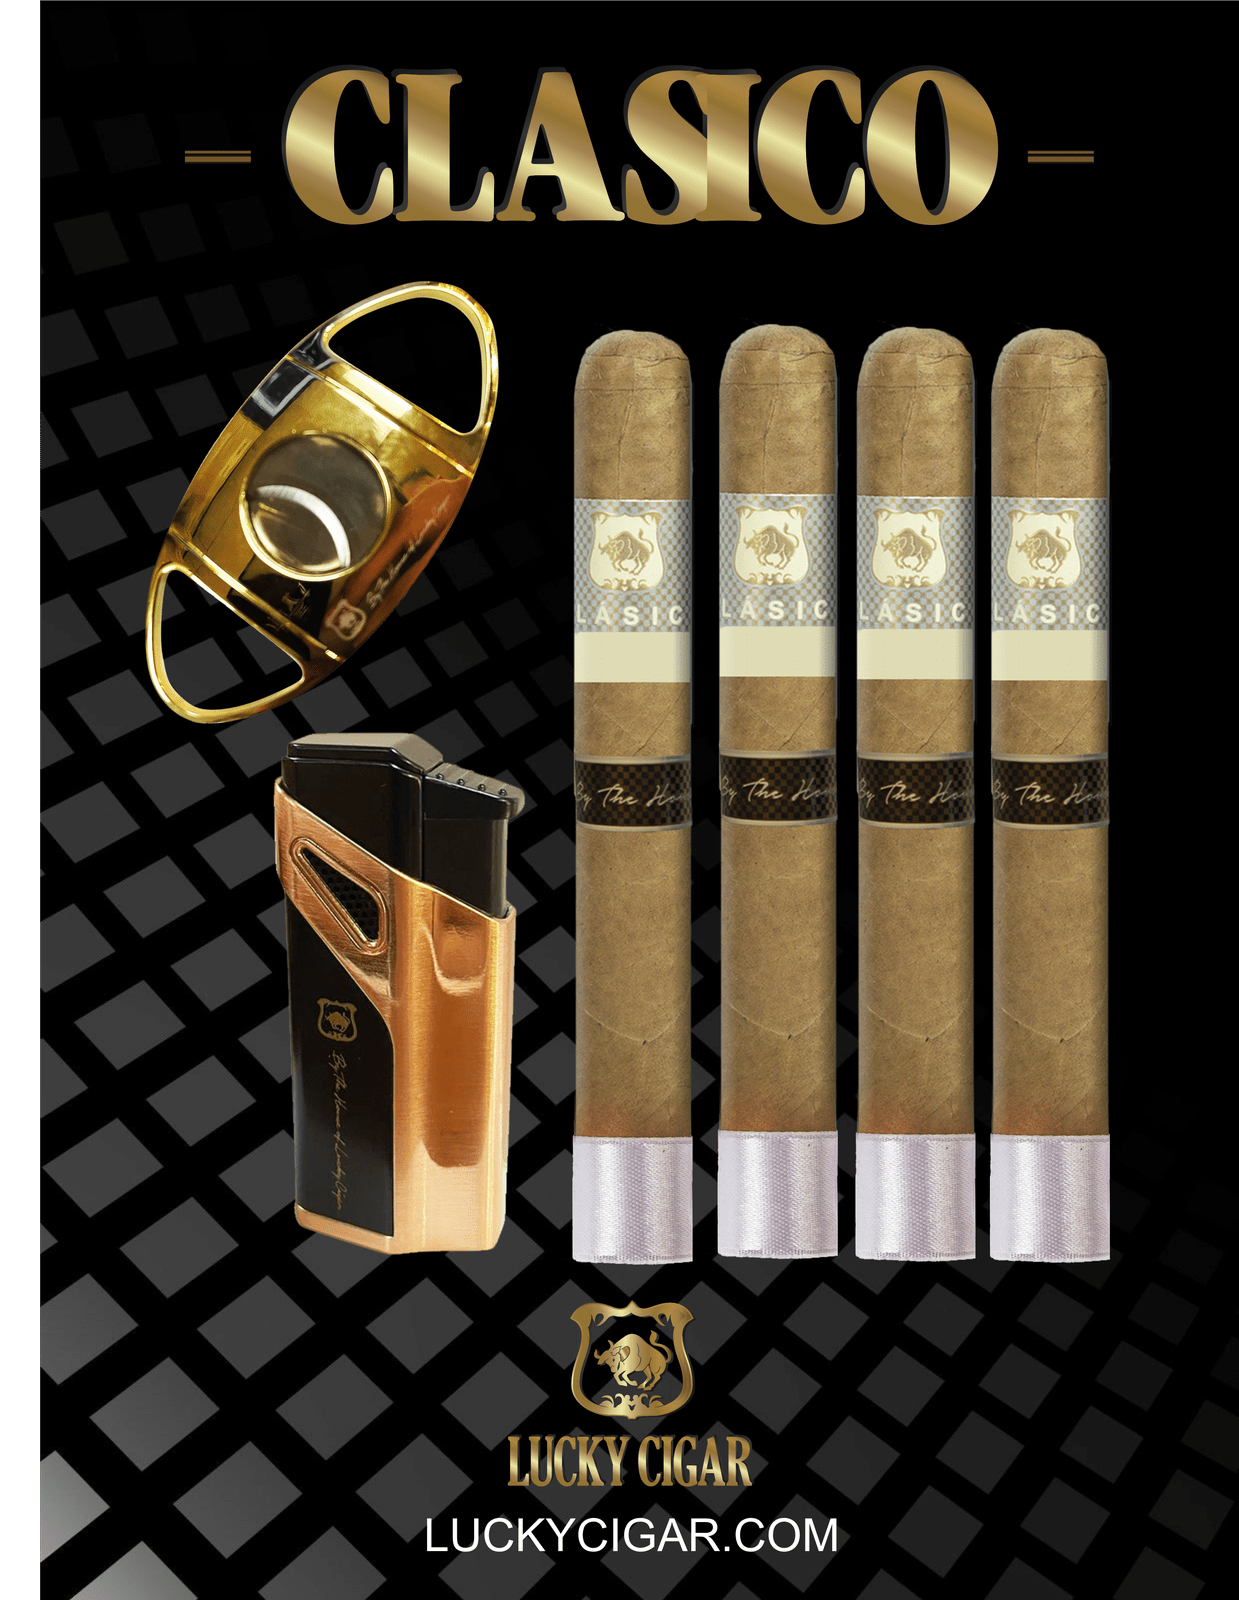 Classic Cigars - Classico by Lucky Cigar: Set of 4 Cigars, 4 Toro with Cutter, Torch